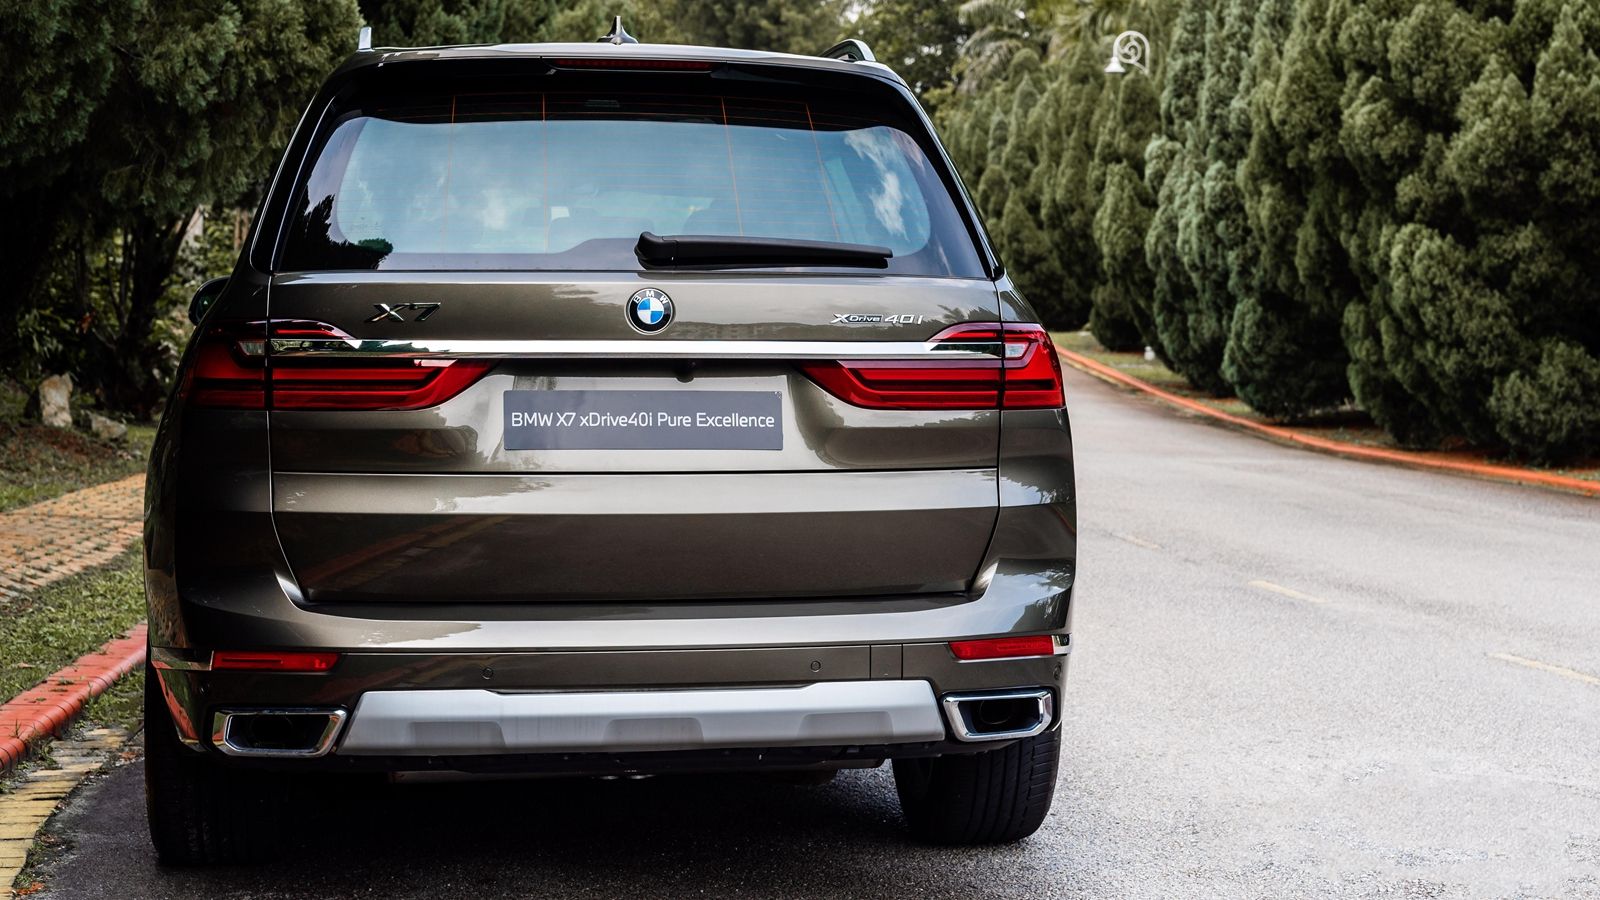 2021 BMW X7 xDrive40i Pure Excellence Exterior 004